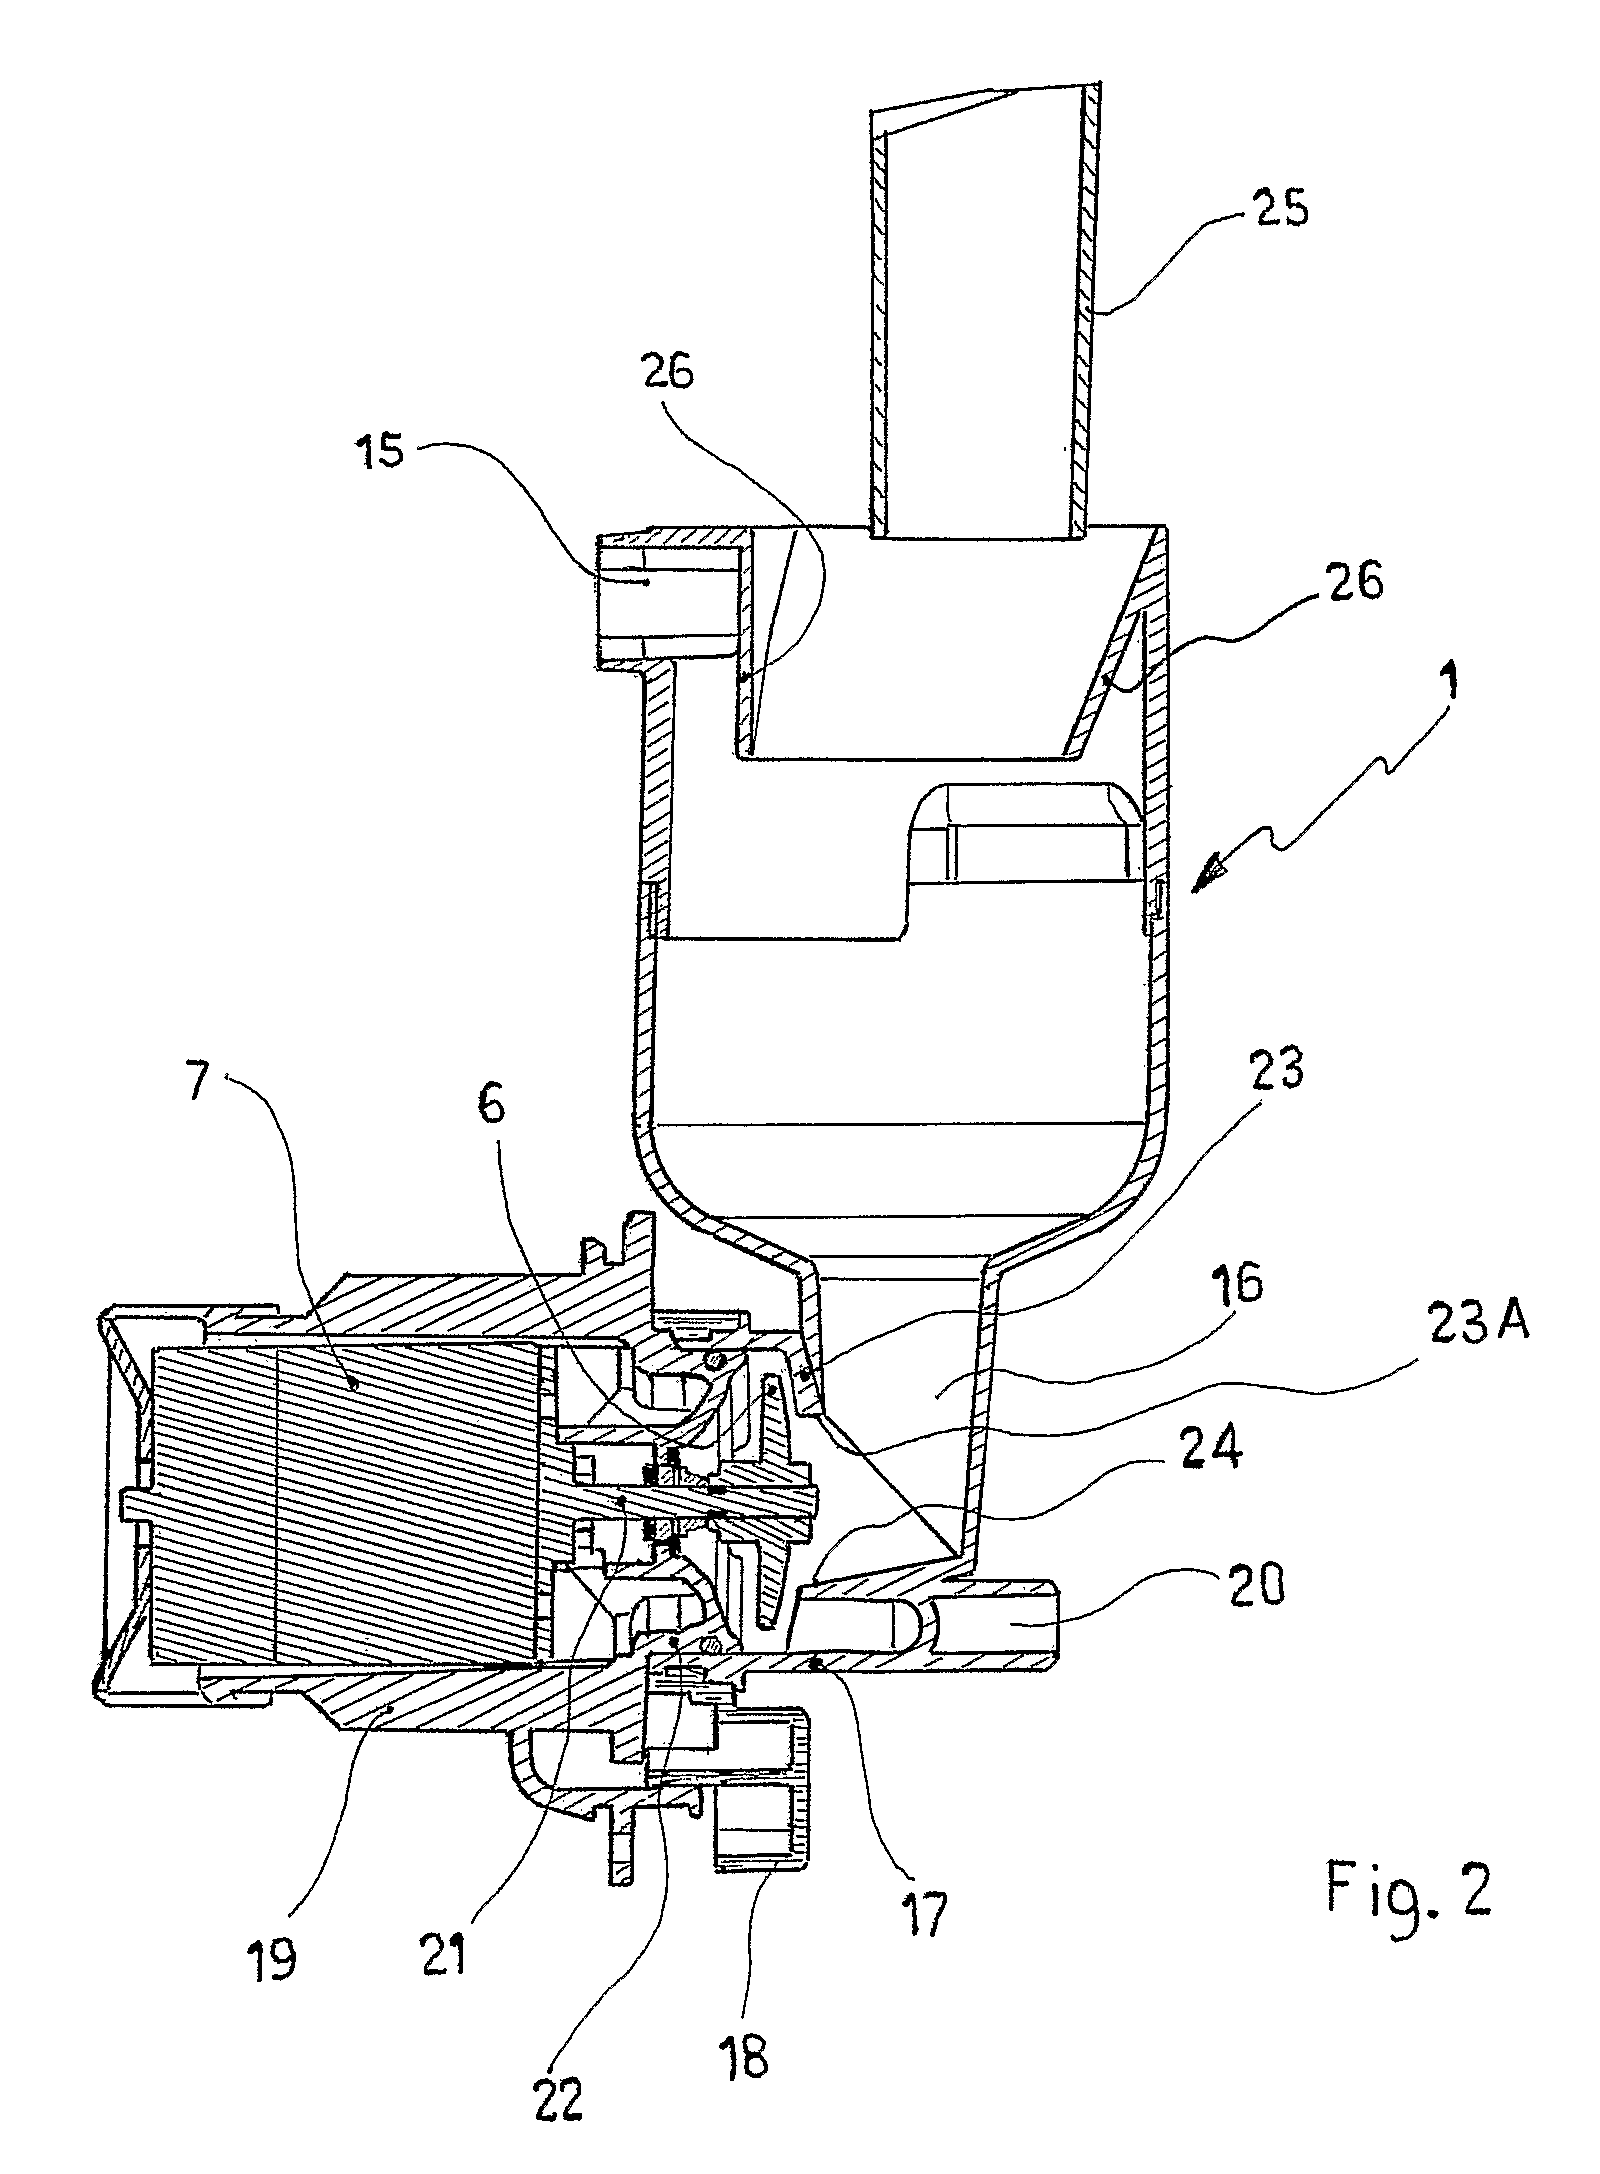 Method and apparatus for preparing beverages from soluble products